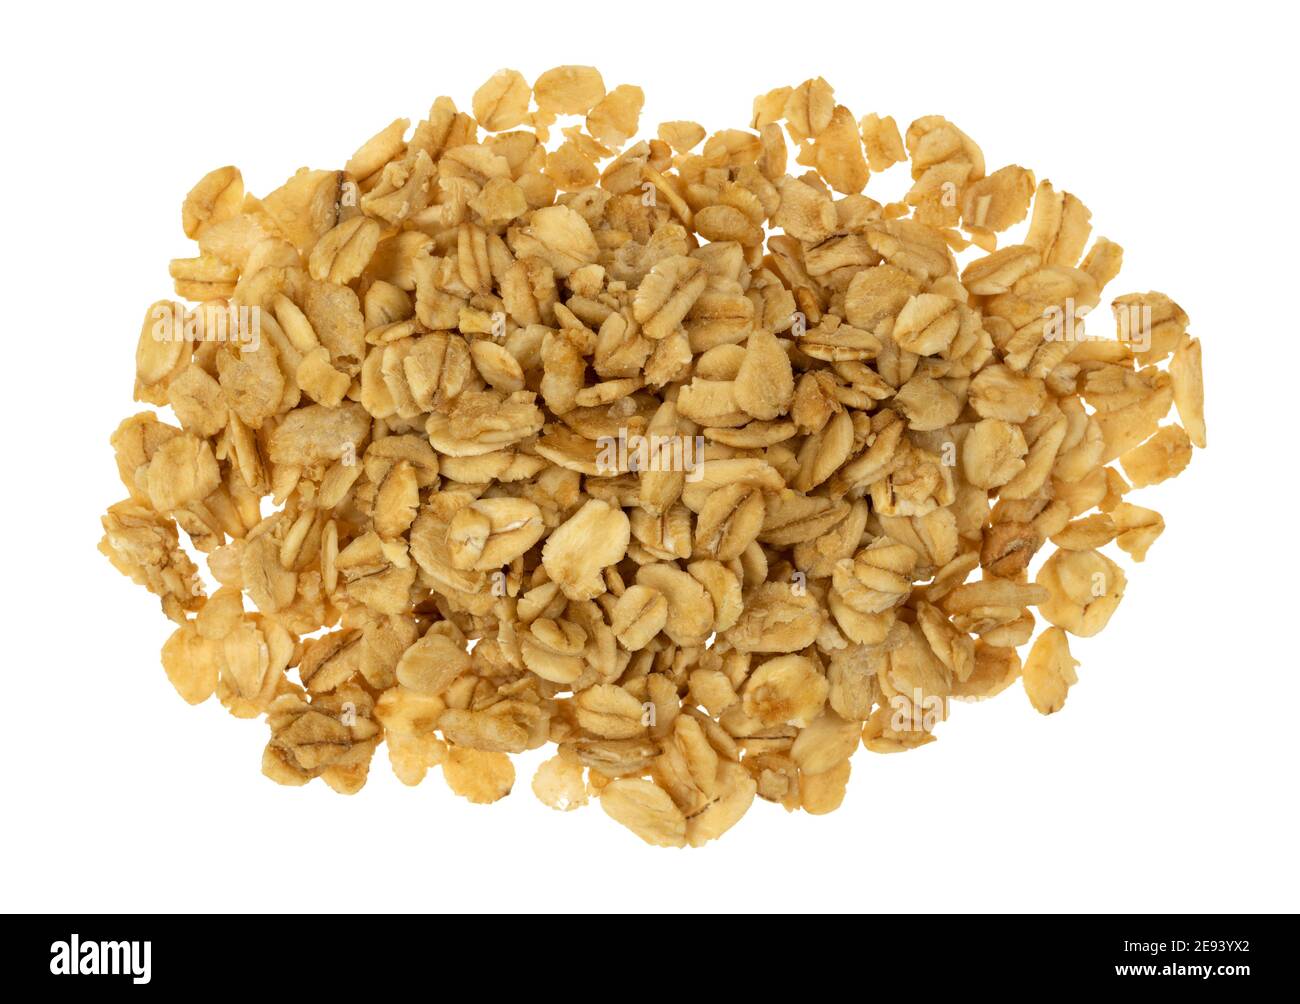 Top view of a portion of brown sugar oat granola isolated on a white background. Stock Photo